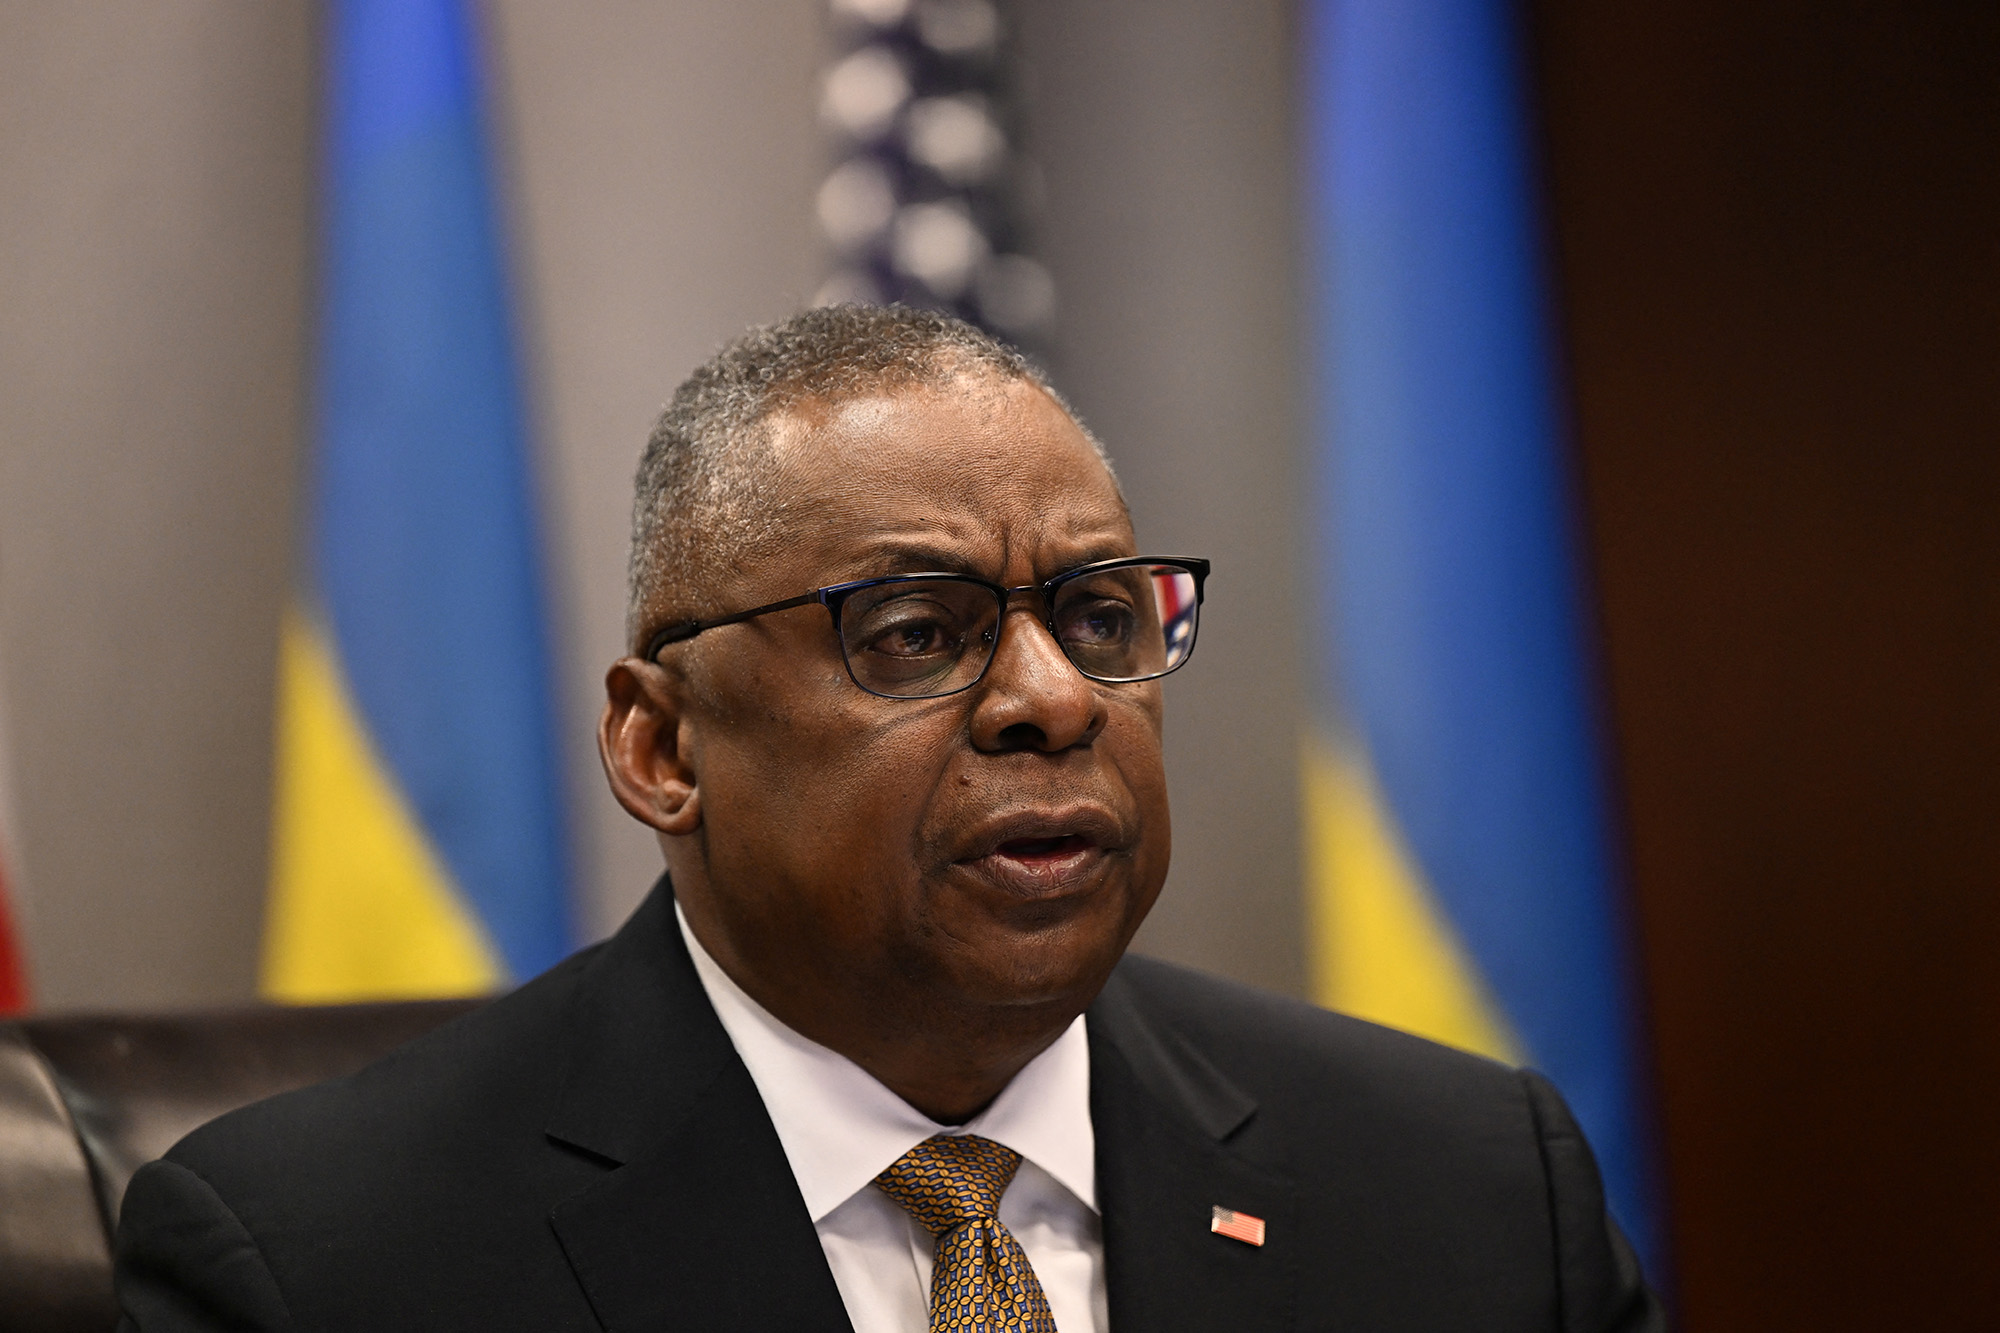 U.S. Defense Secretary Lloyd Austin attends a virtual meeting of Ukraine Defense Contact Group, at the Pentagon in Washington D.C, on March 15.